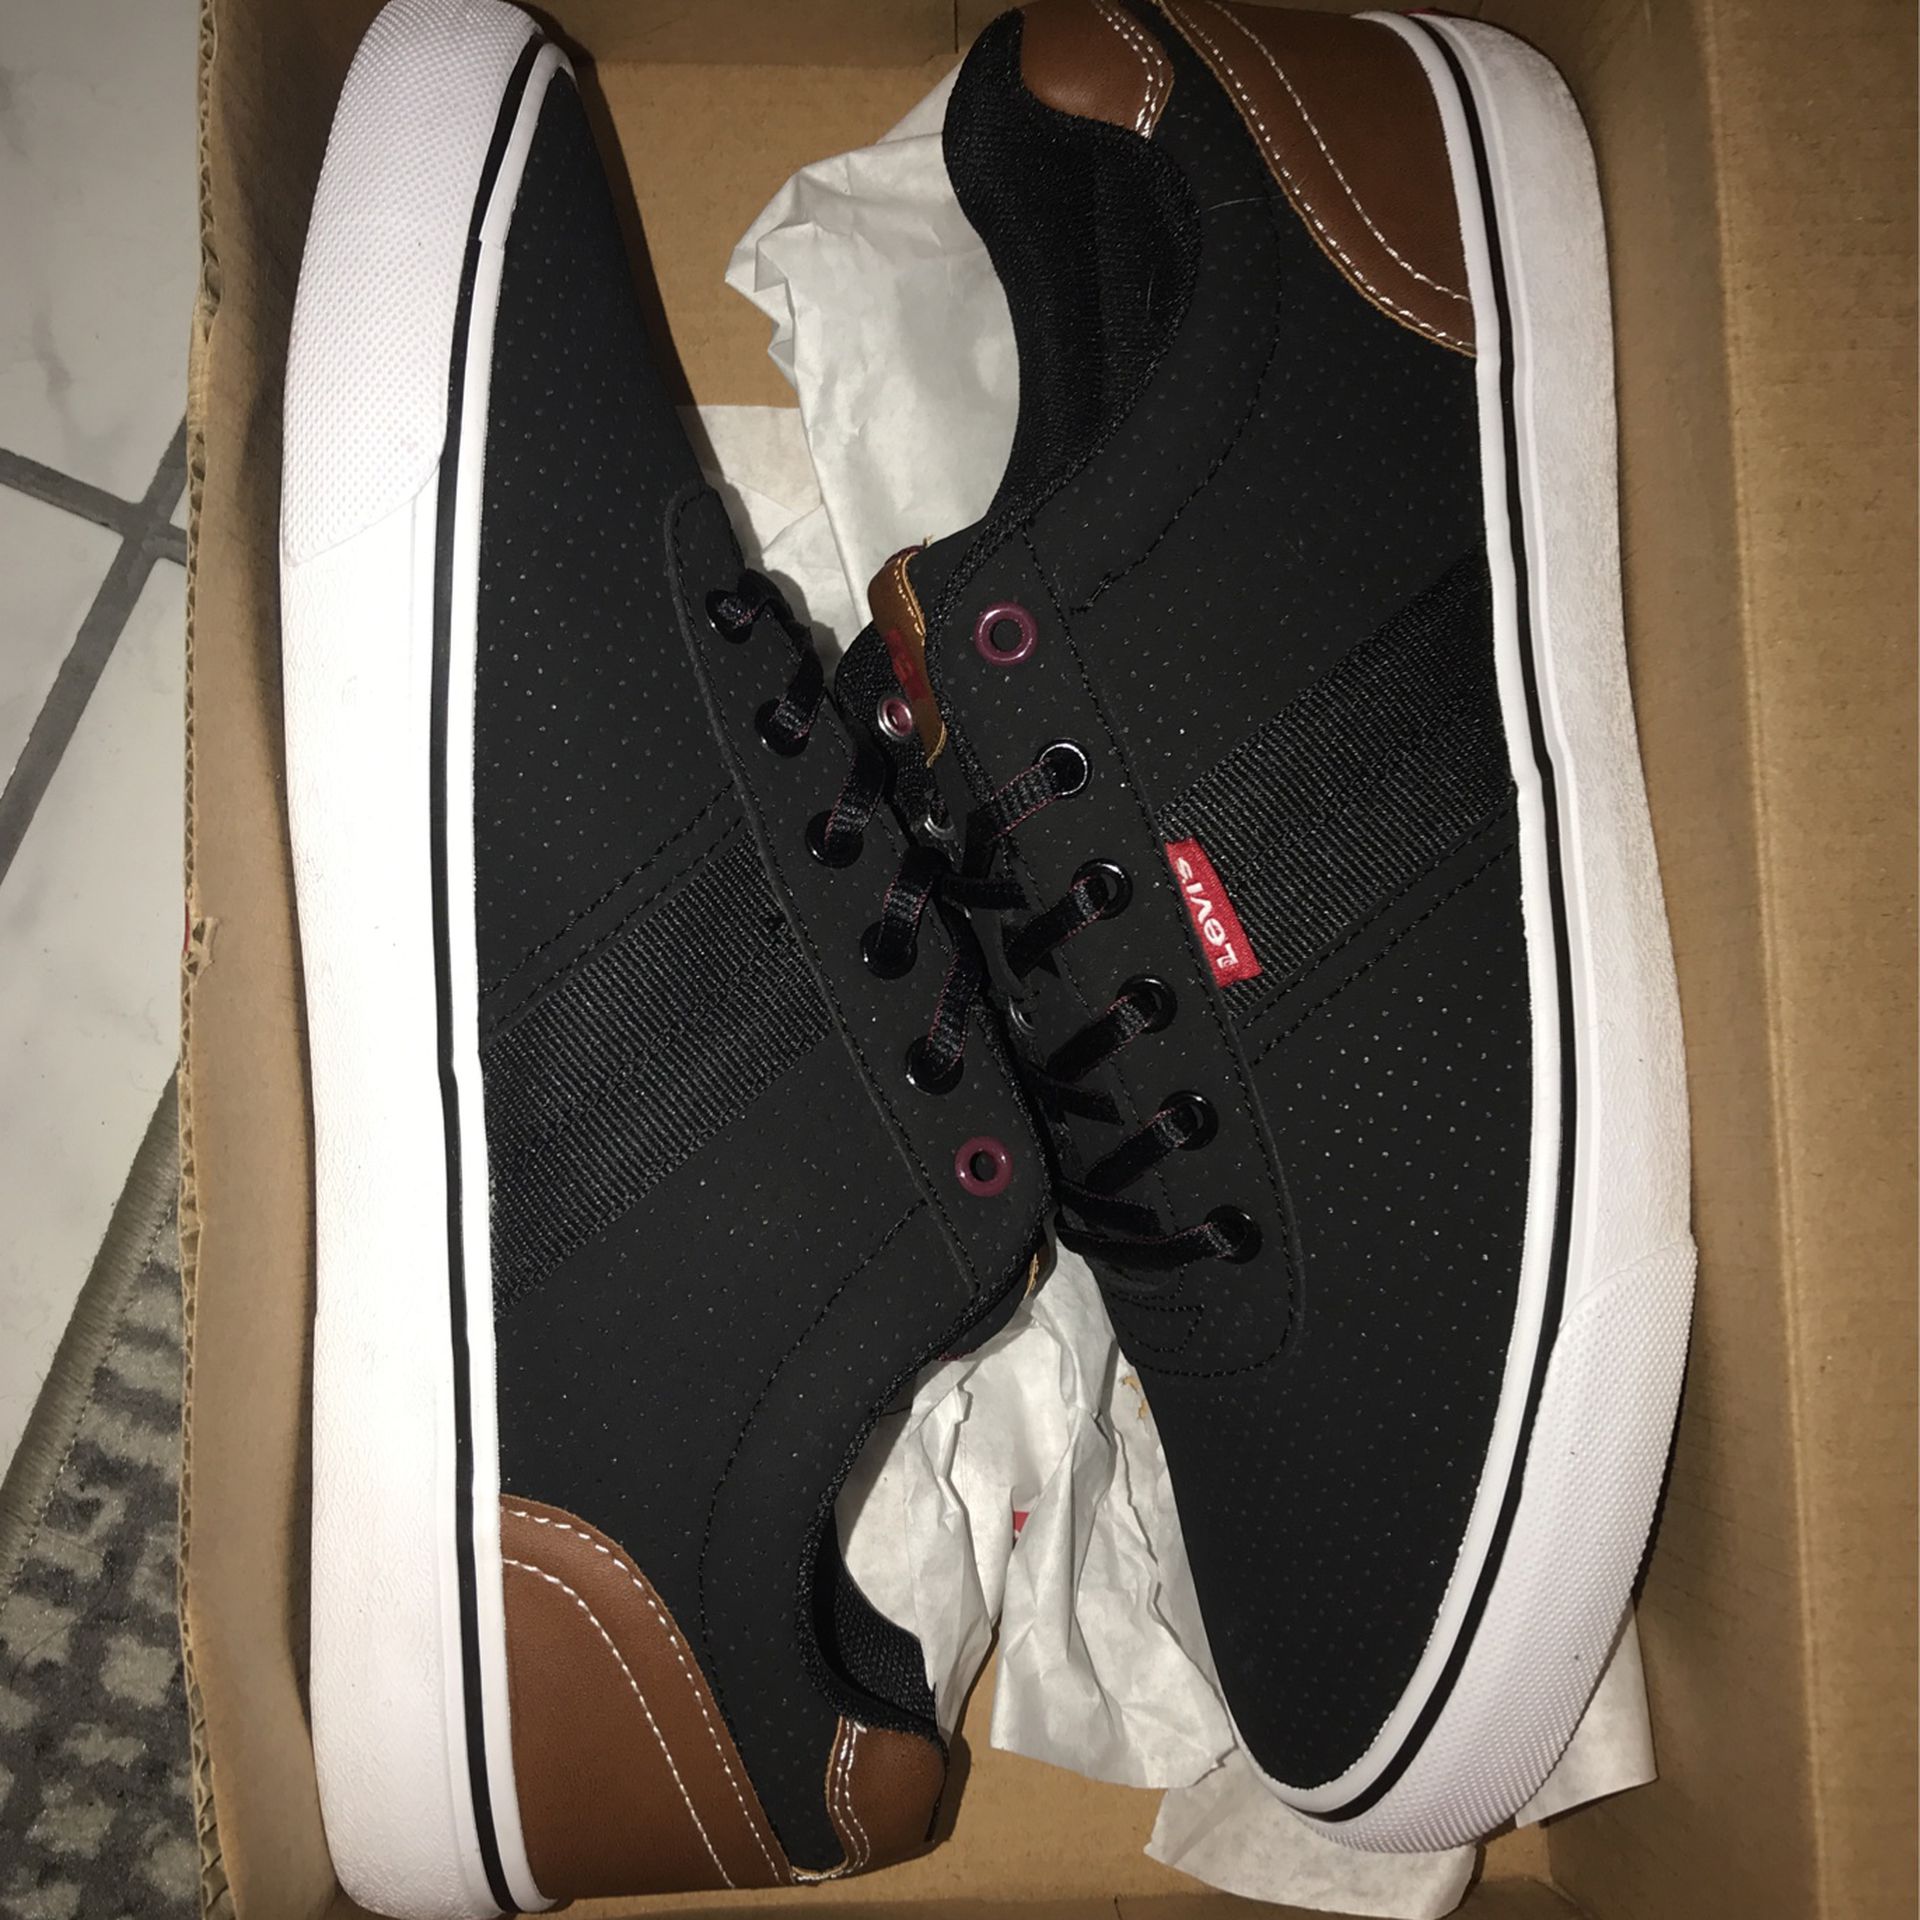 Levi's Comfort Shoes for Sale in Aurora, IL - OfferUp